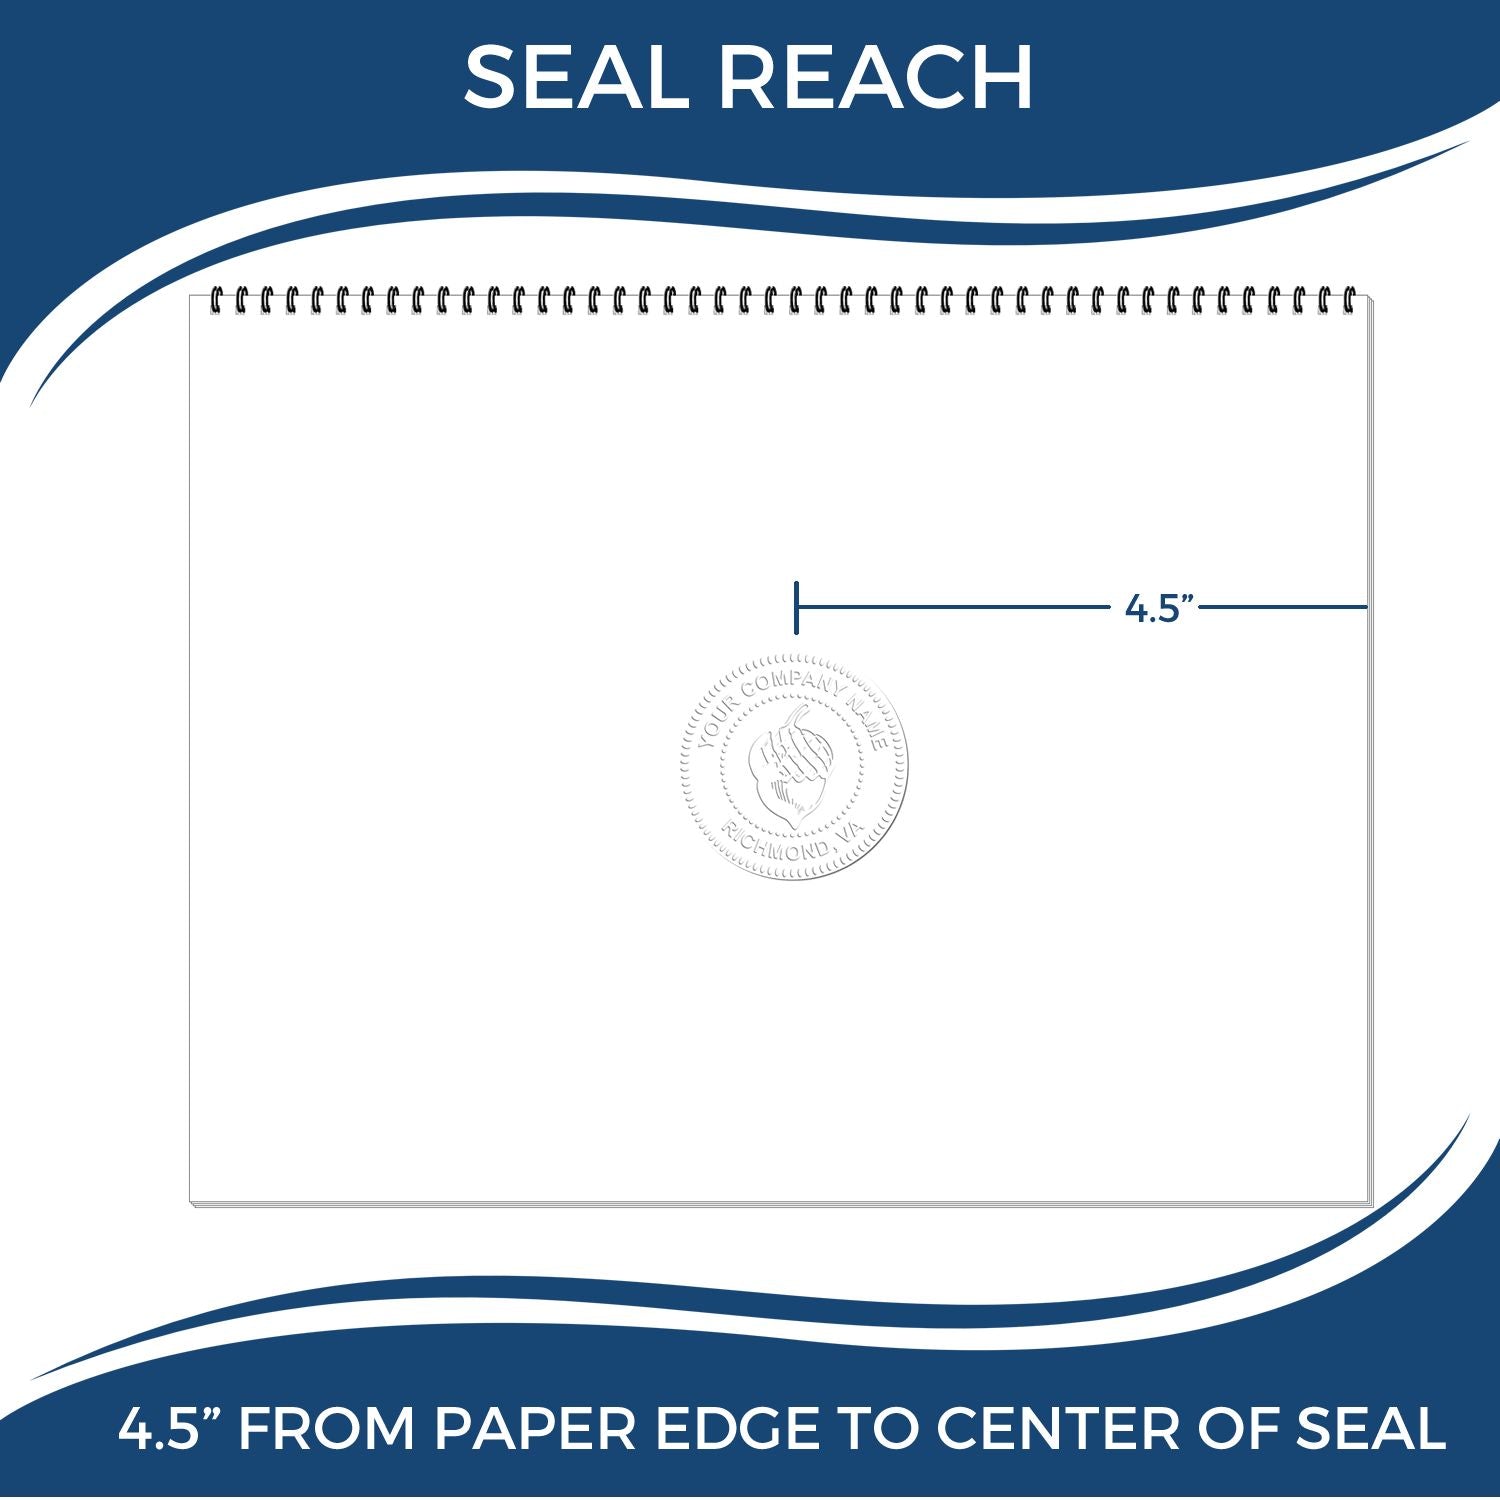 An infographic showing the seal reach which is represented by a ruler and a miniature seal image of the Extended Long Reach Idaho Surveyor Embosser